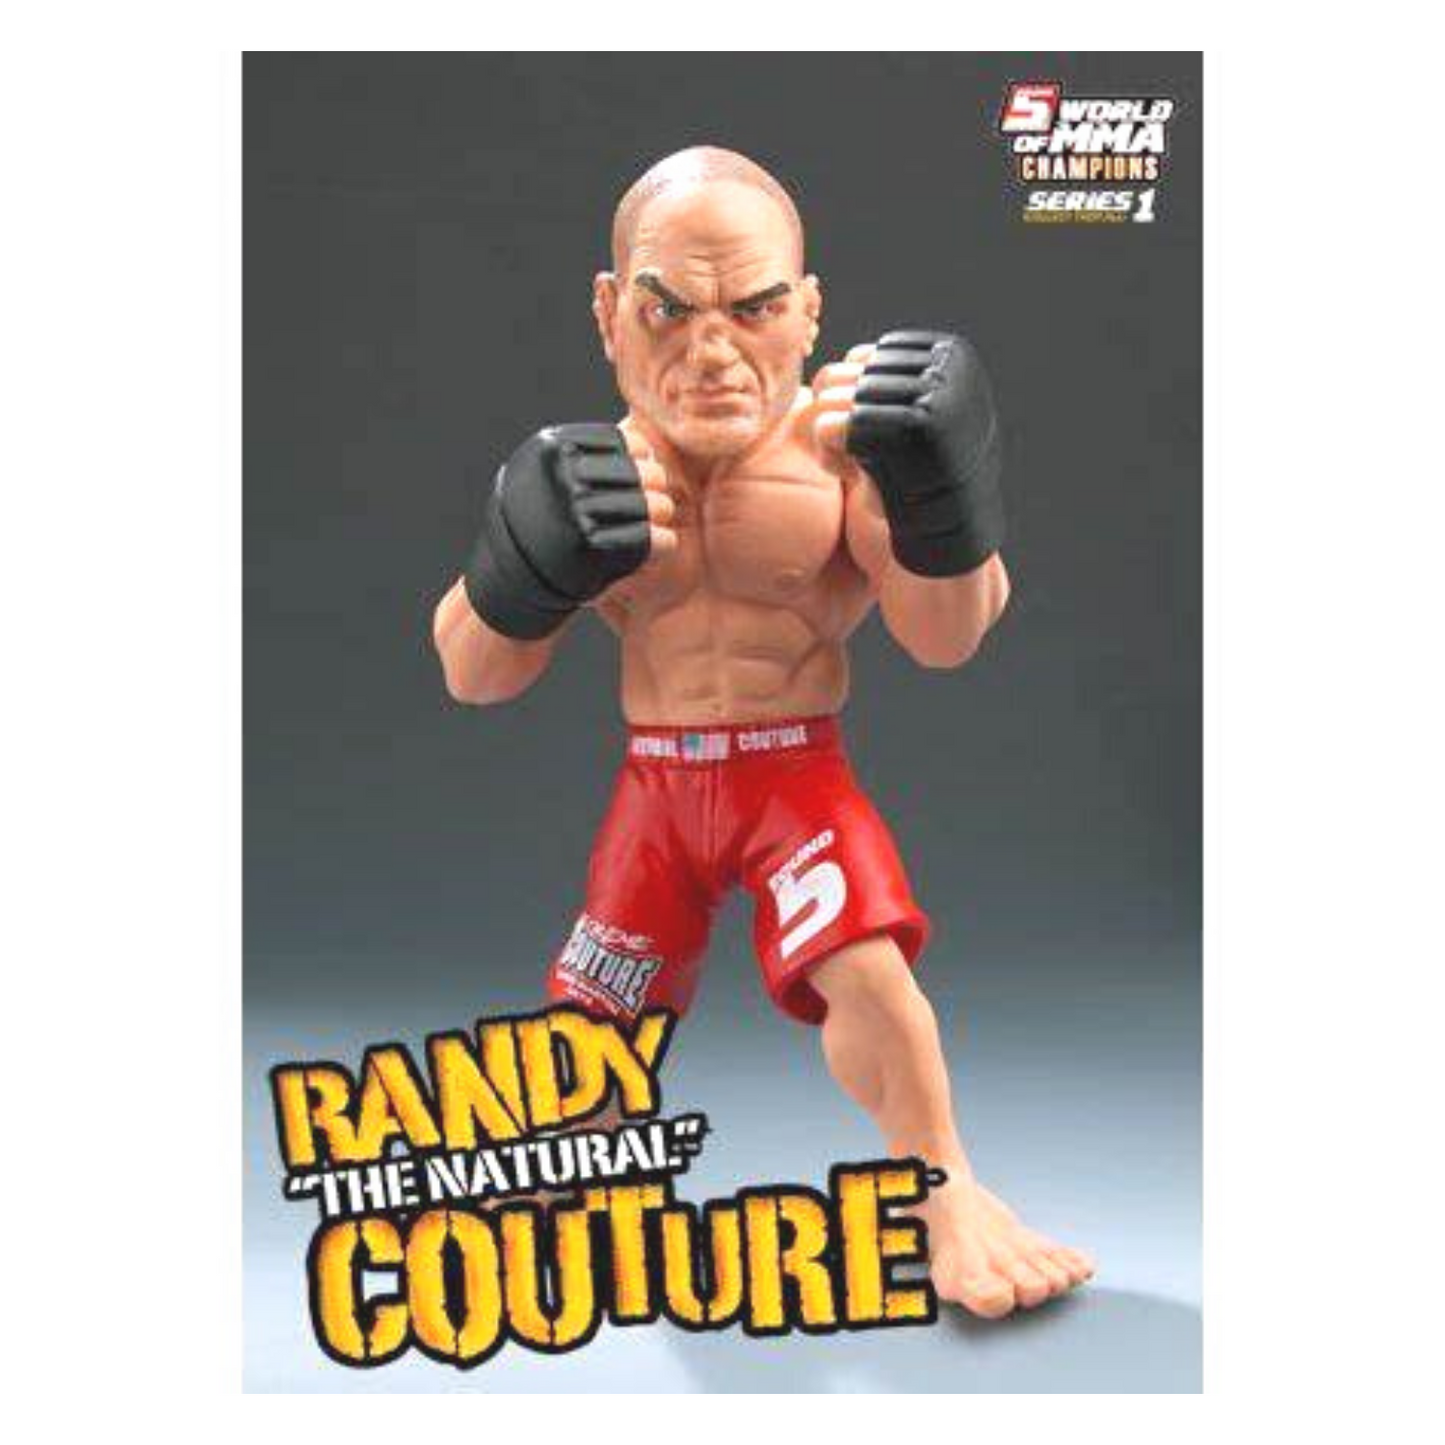 Round 5 UFC Randy “The Natural” Couture MMA (WOMMA) Series 1 Action Figure